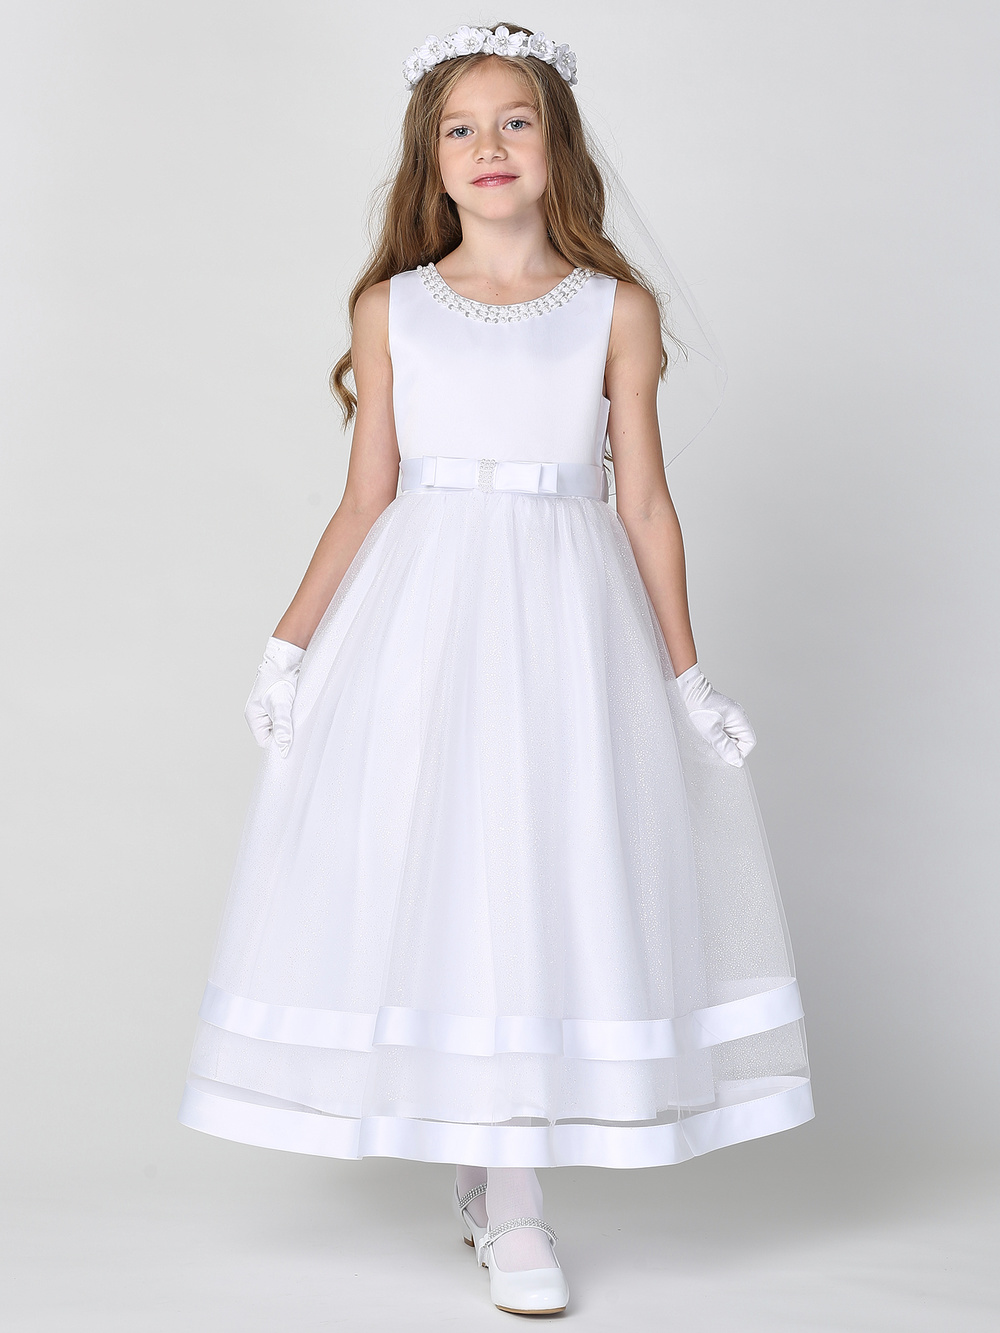 First Communion Dress Satin Bodice with Glitter Skirt Double Satin Band Trim